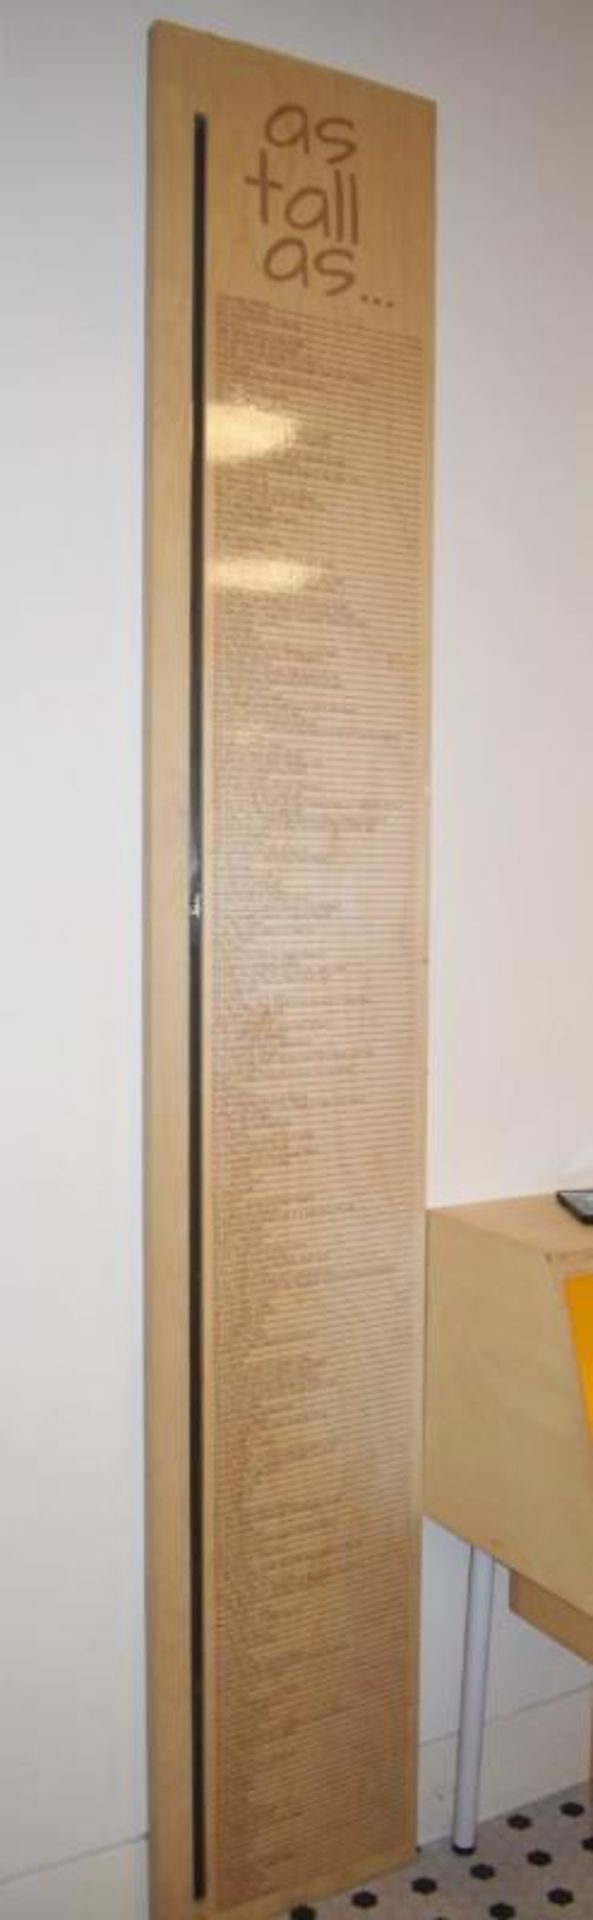 1 x Childrens As Tall As Wooden Height Chart - Approx 6ft Tall - CL489 - Location: Putney, London,